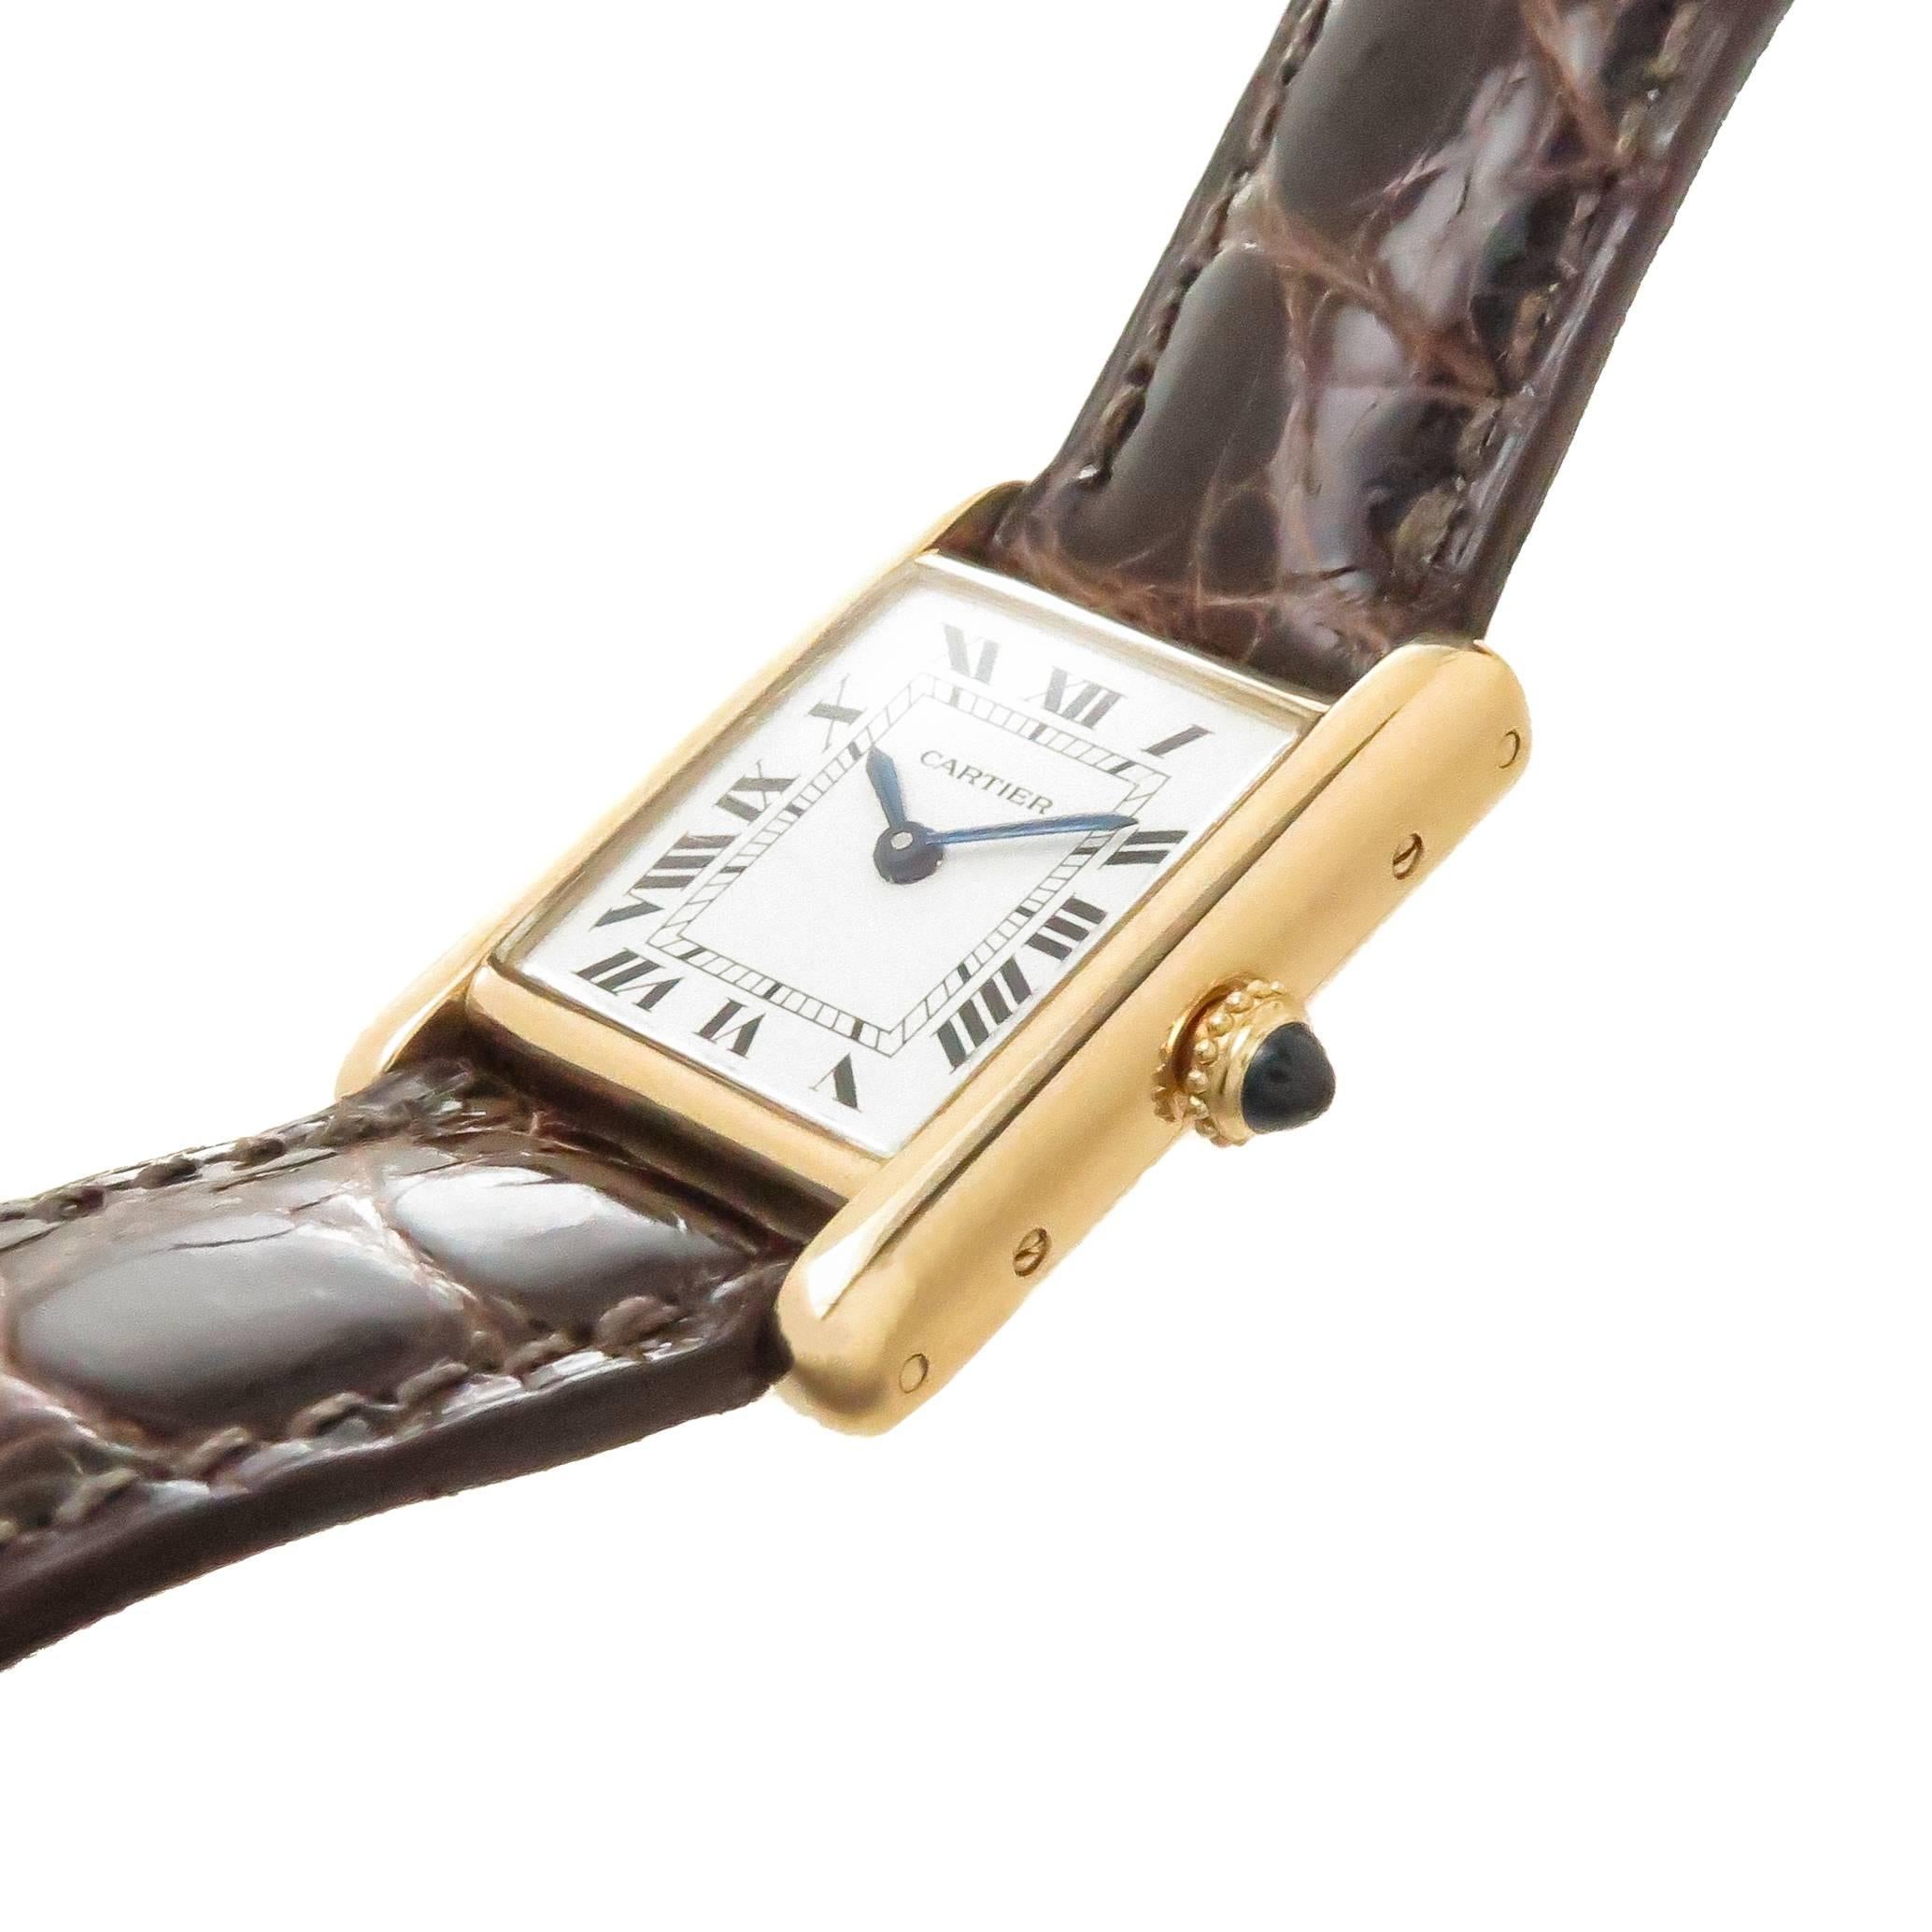 Circa 1980s Cartier Paris Classic ladies Tank Wrist watch,  28 X 20 MM 18K Yellow Gold 2 Piece Case. 17 Jewel Cartier Mechanical, Manual wind movement. White Dial with Black Roman numerals. New Brown Alligator Strap with Cartier Gold Plate Tang